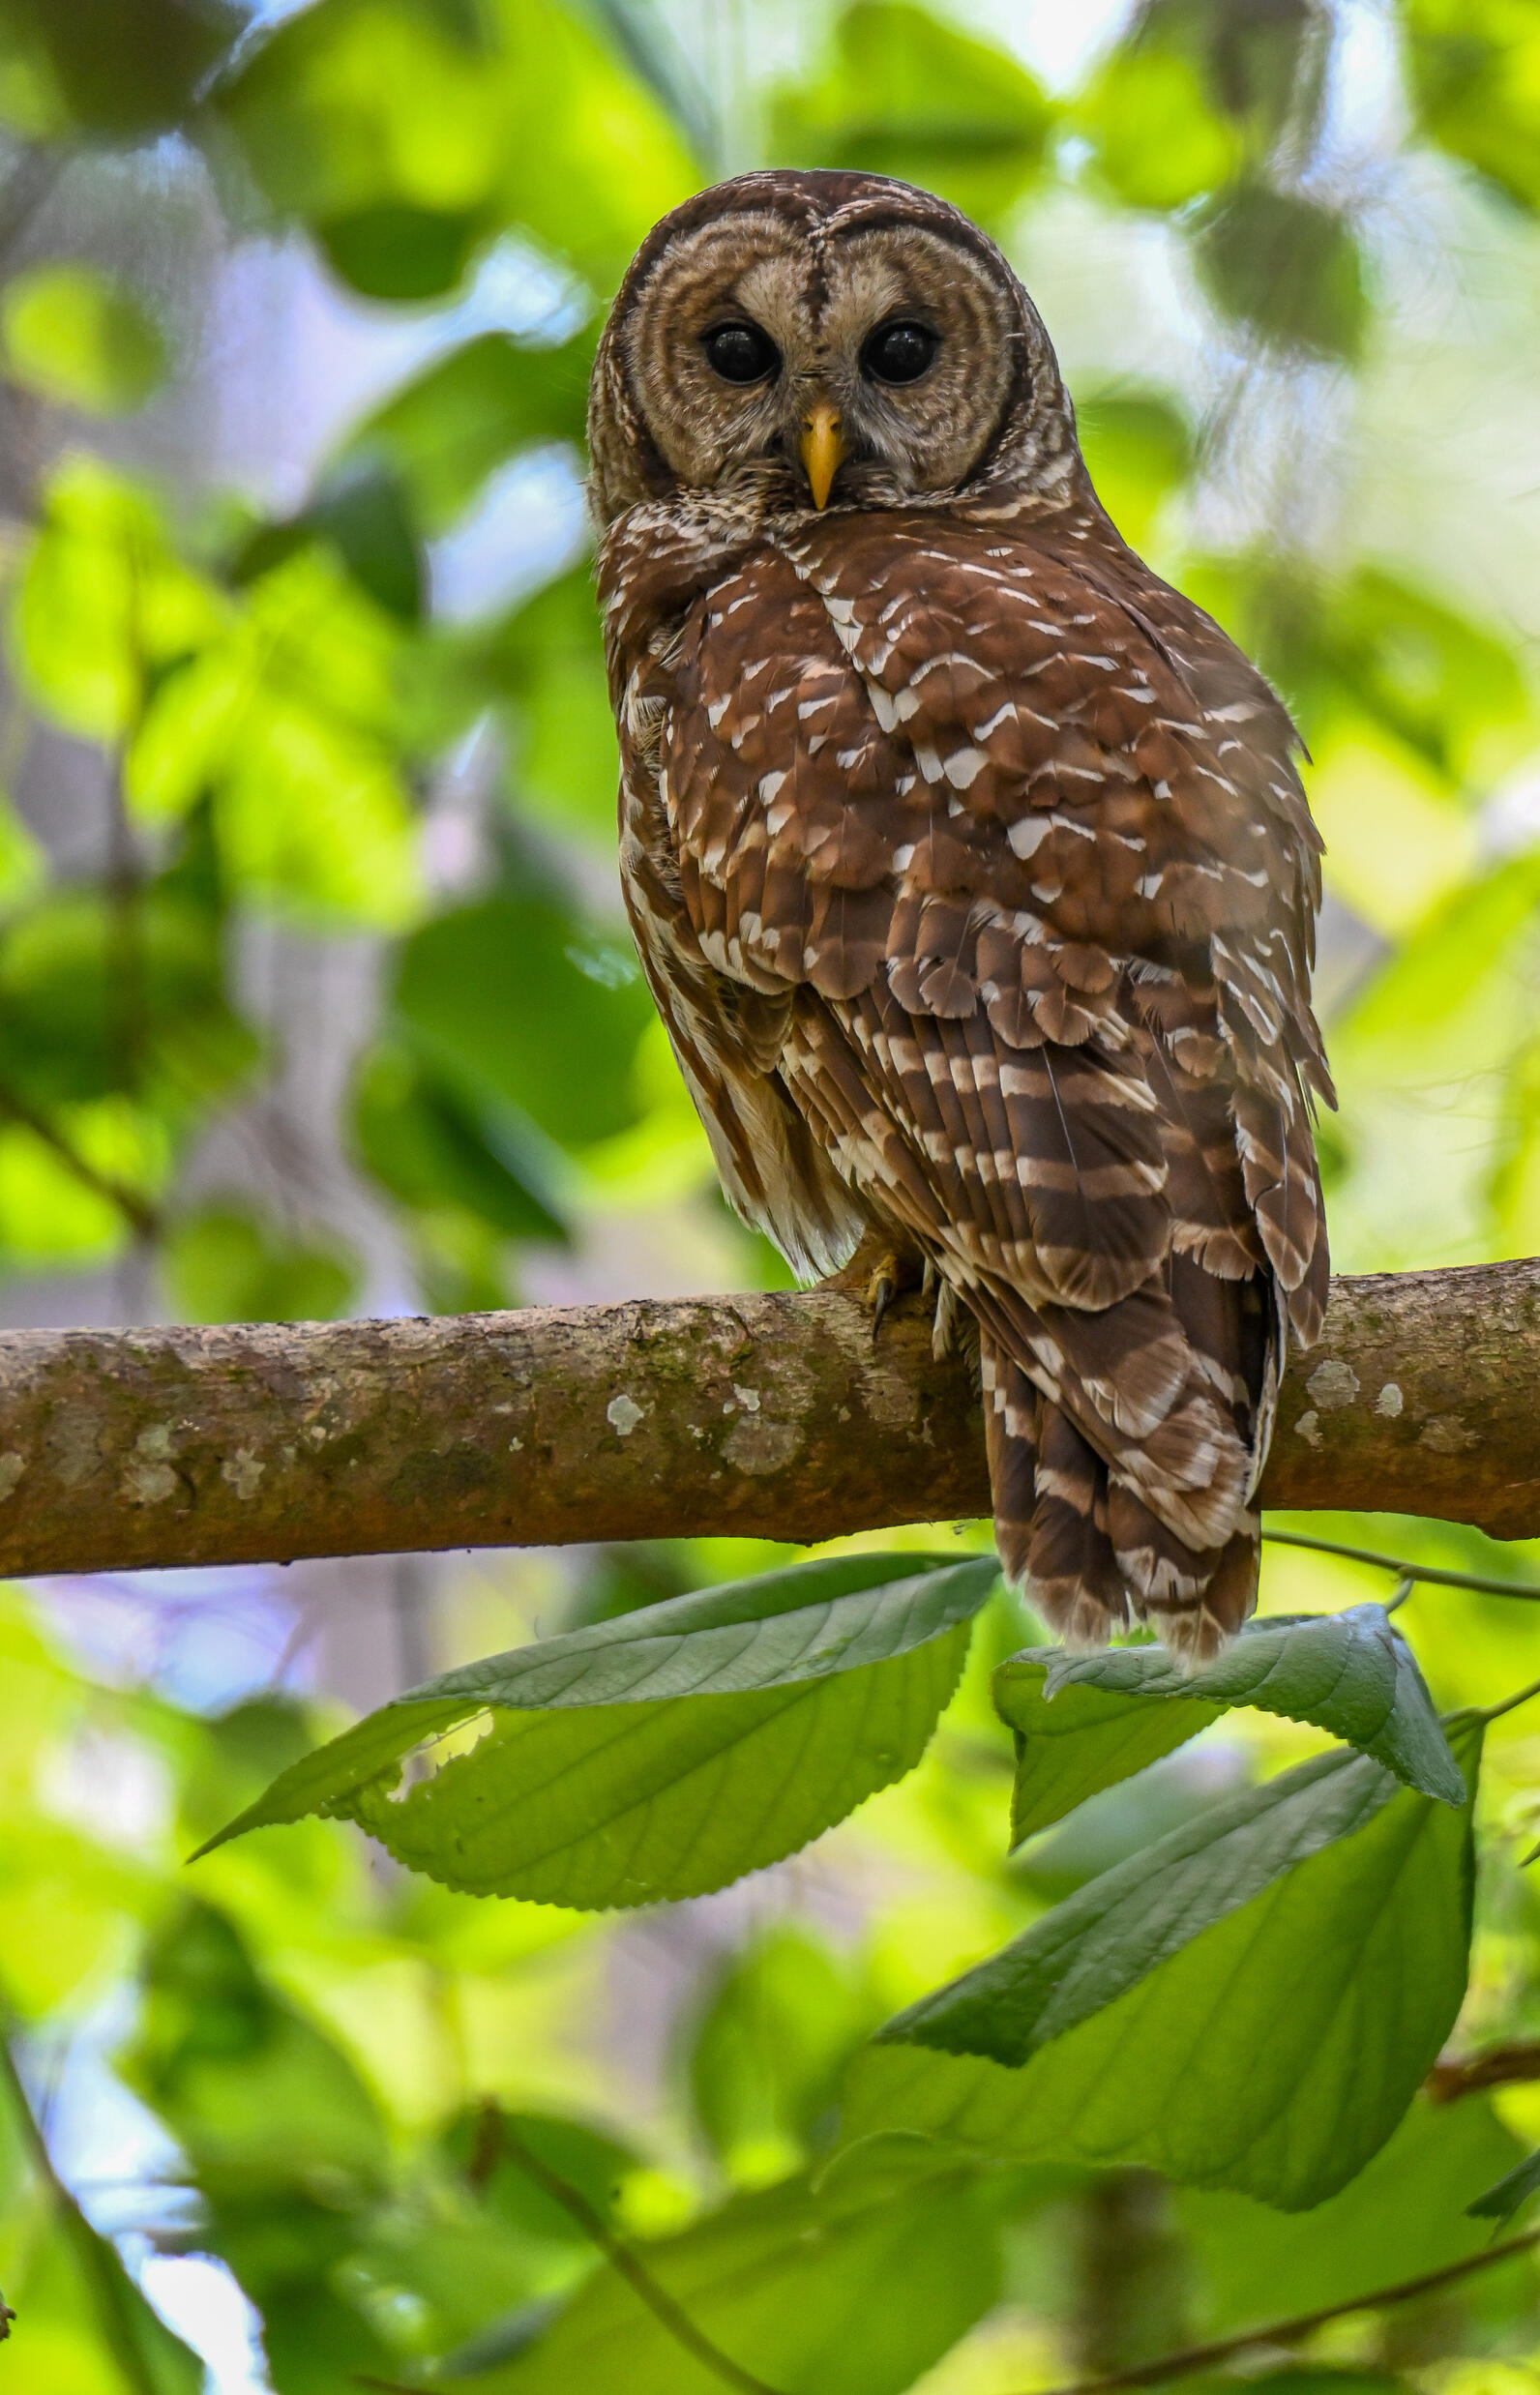 A brown bird of prey in a green canopy